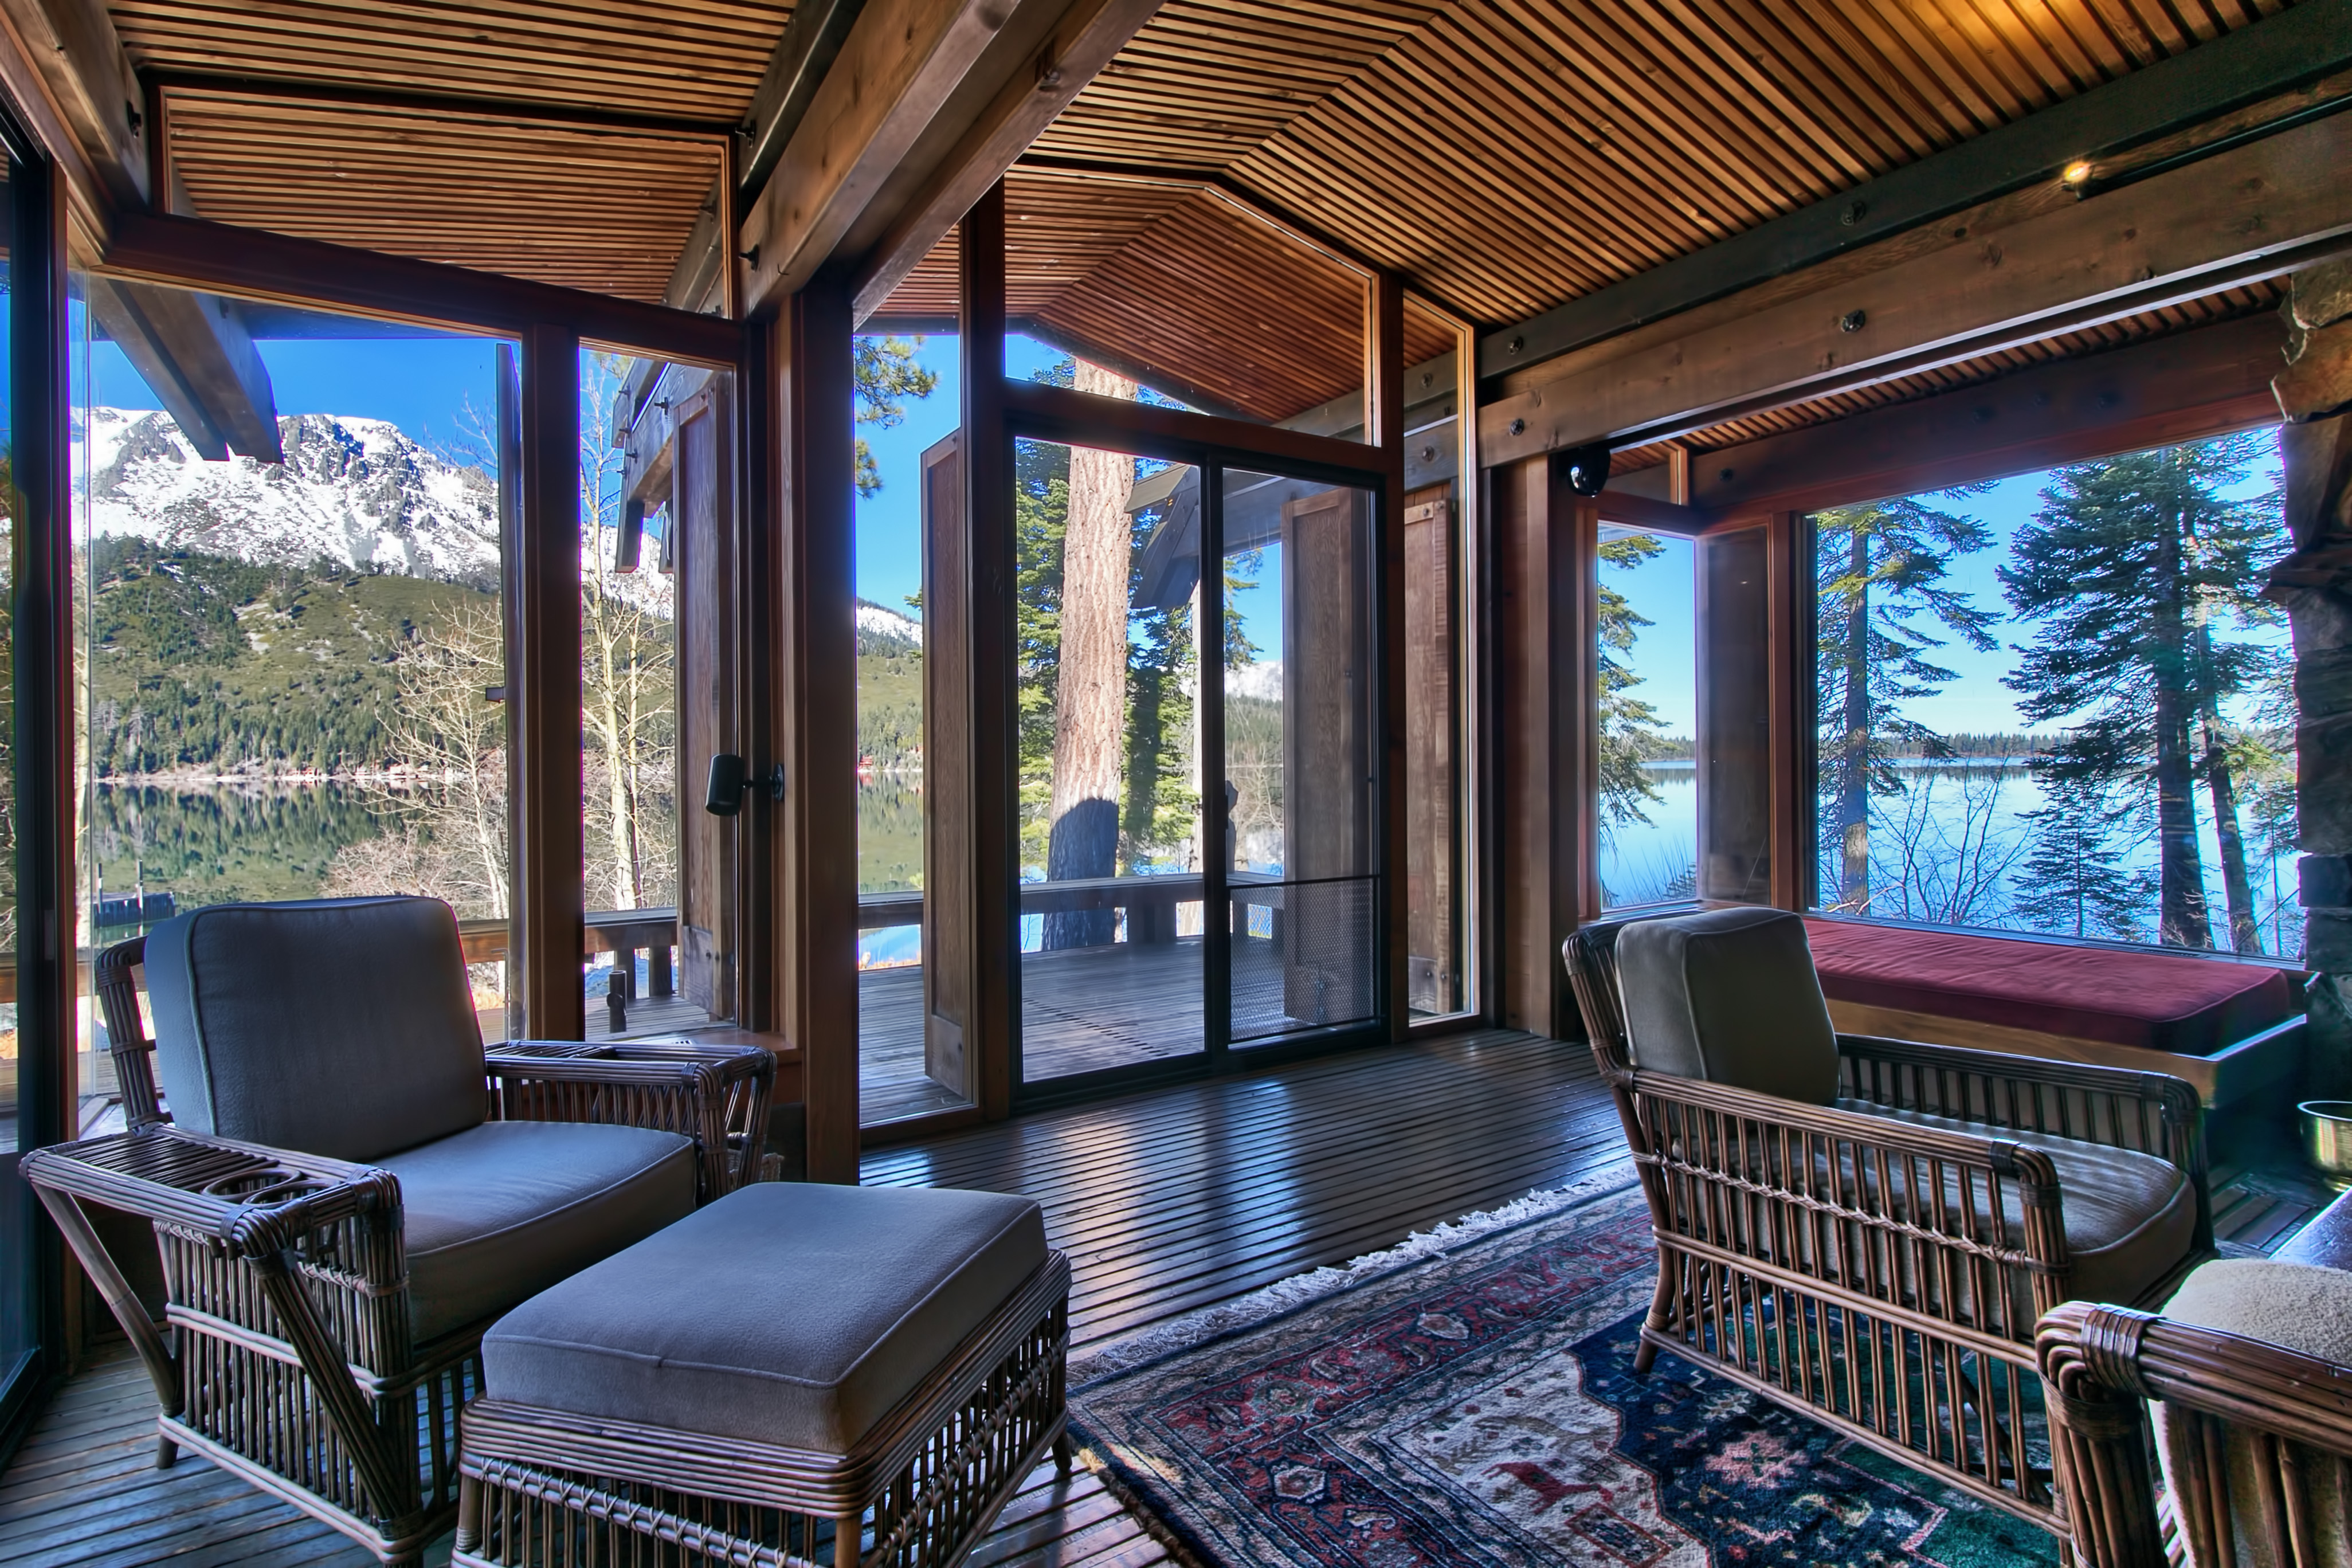 Lake Tahoe home featured in ‘The Bodyguard’ for sale (Photos)